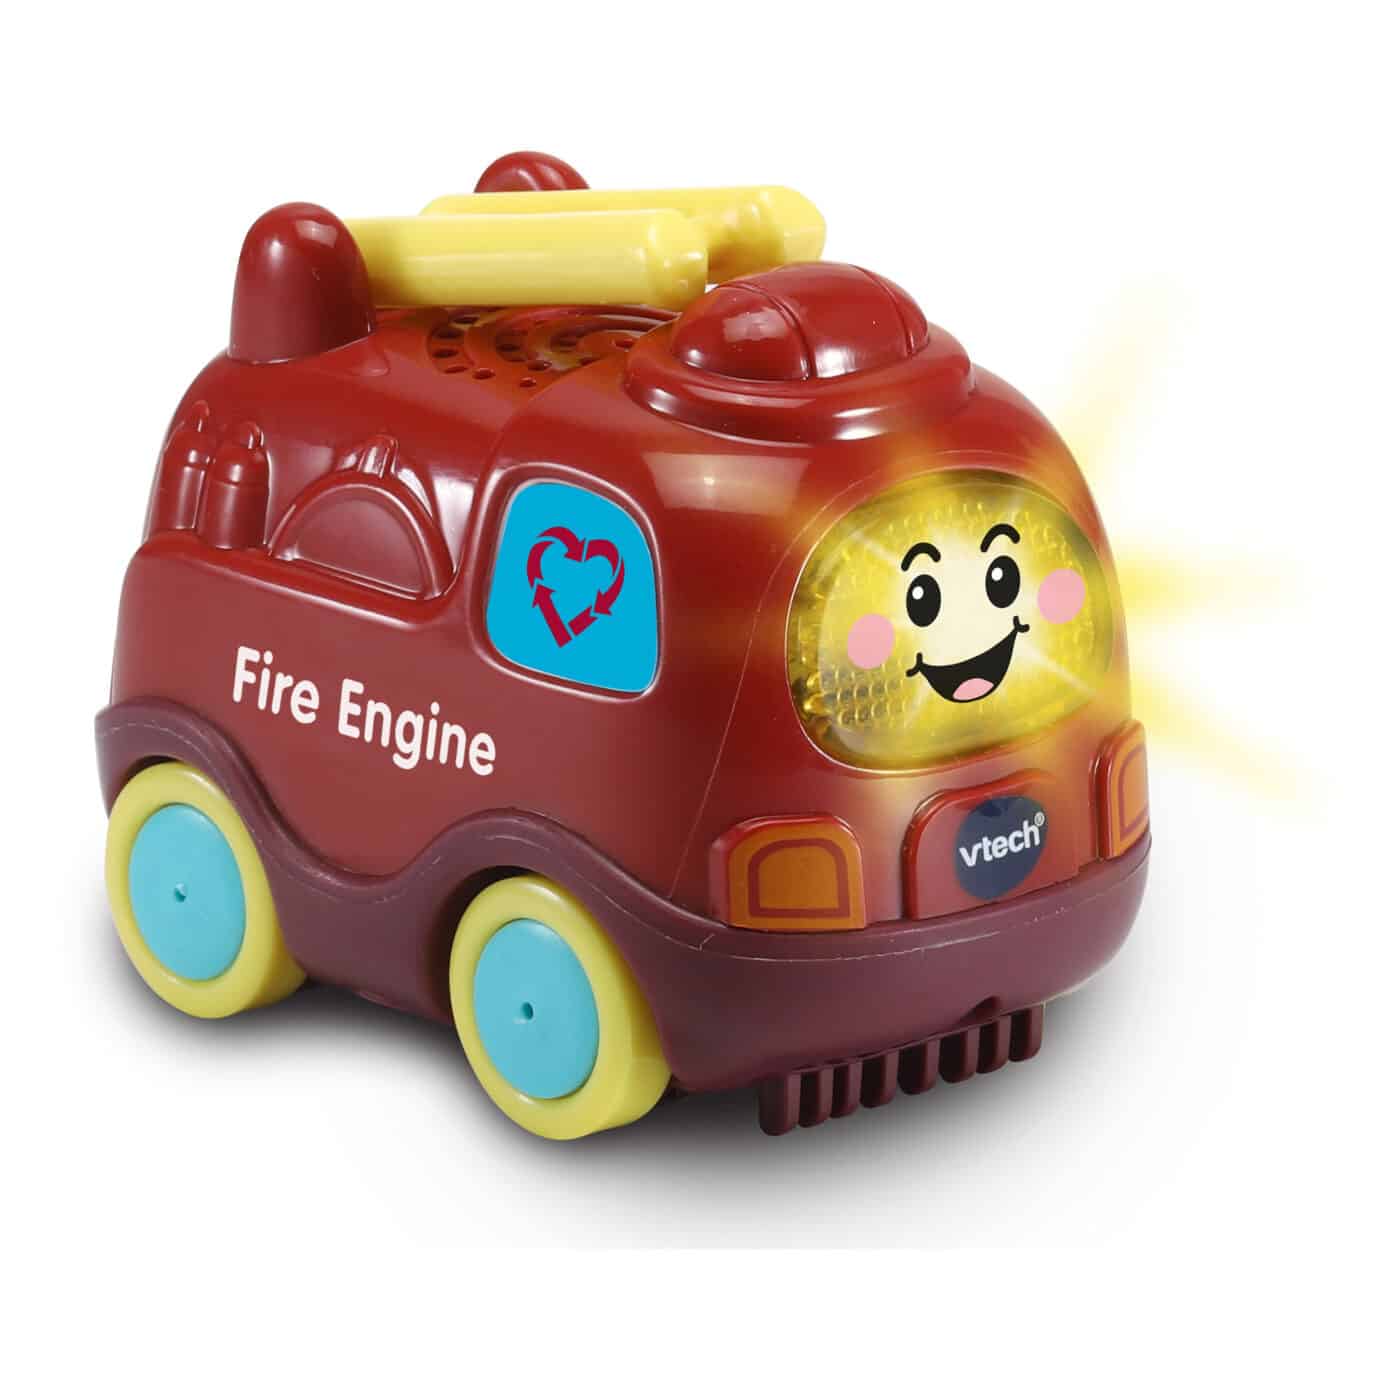 Vtech - Toot Toot Drivers Vehicle Special Edition - Fire Engine